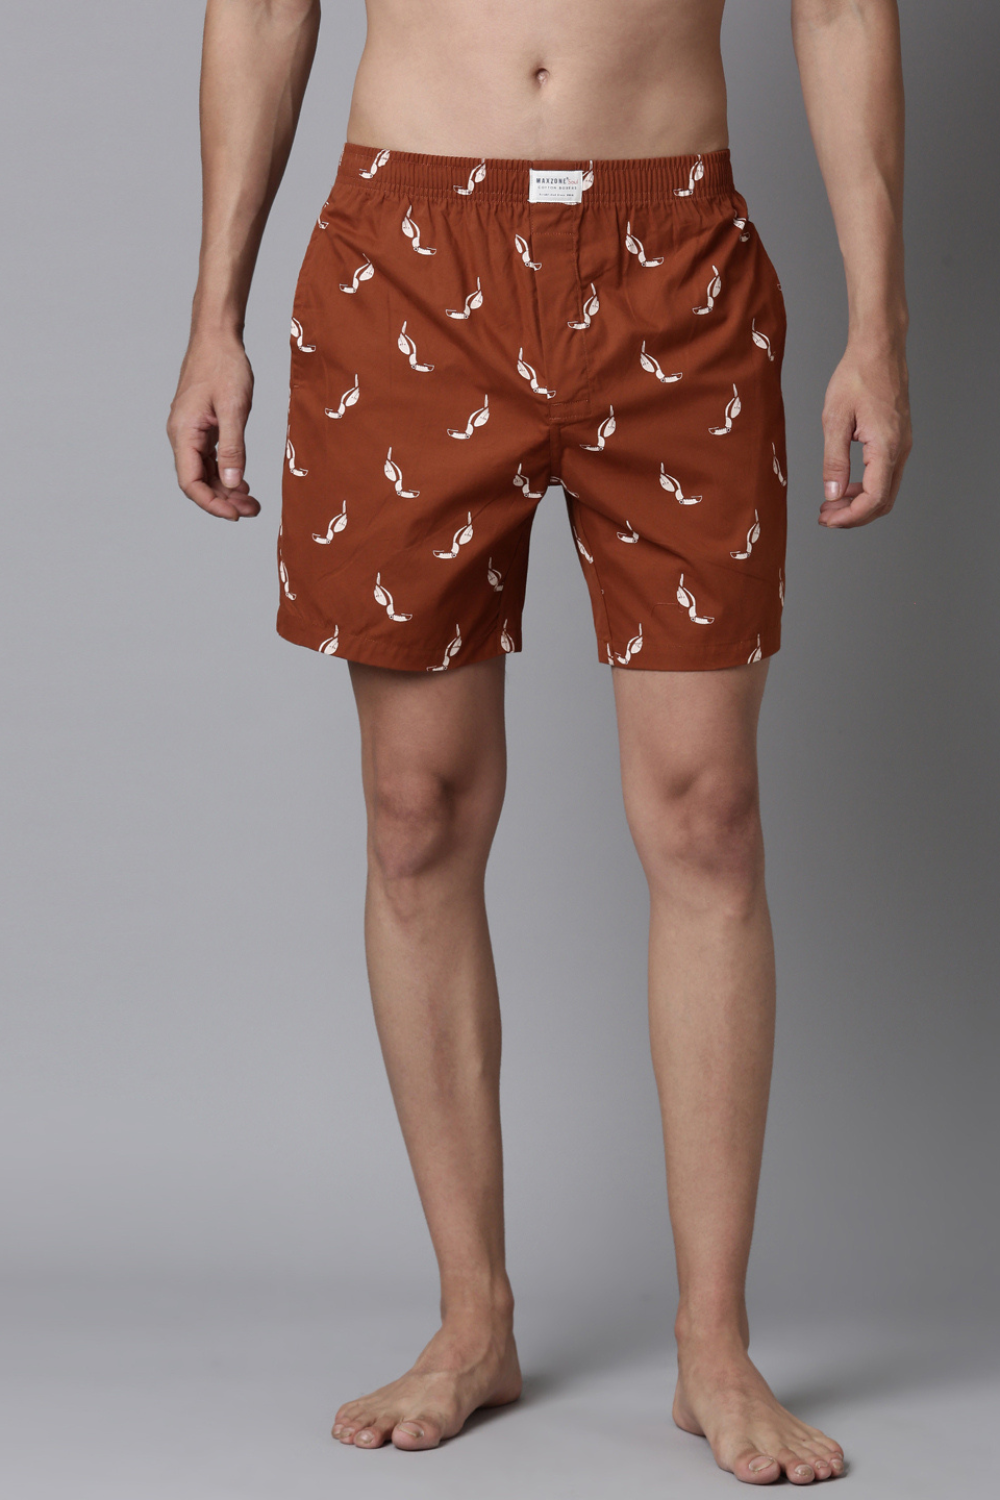 Russet Printed & Sand-Stone Printed 365 Boxers Combo  Maxzone Clothing   